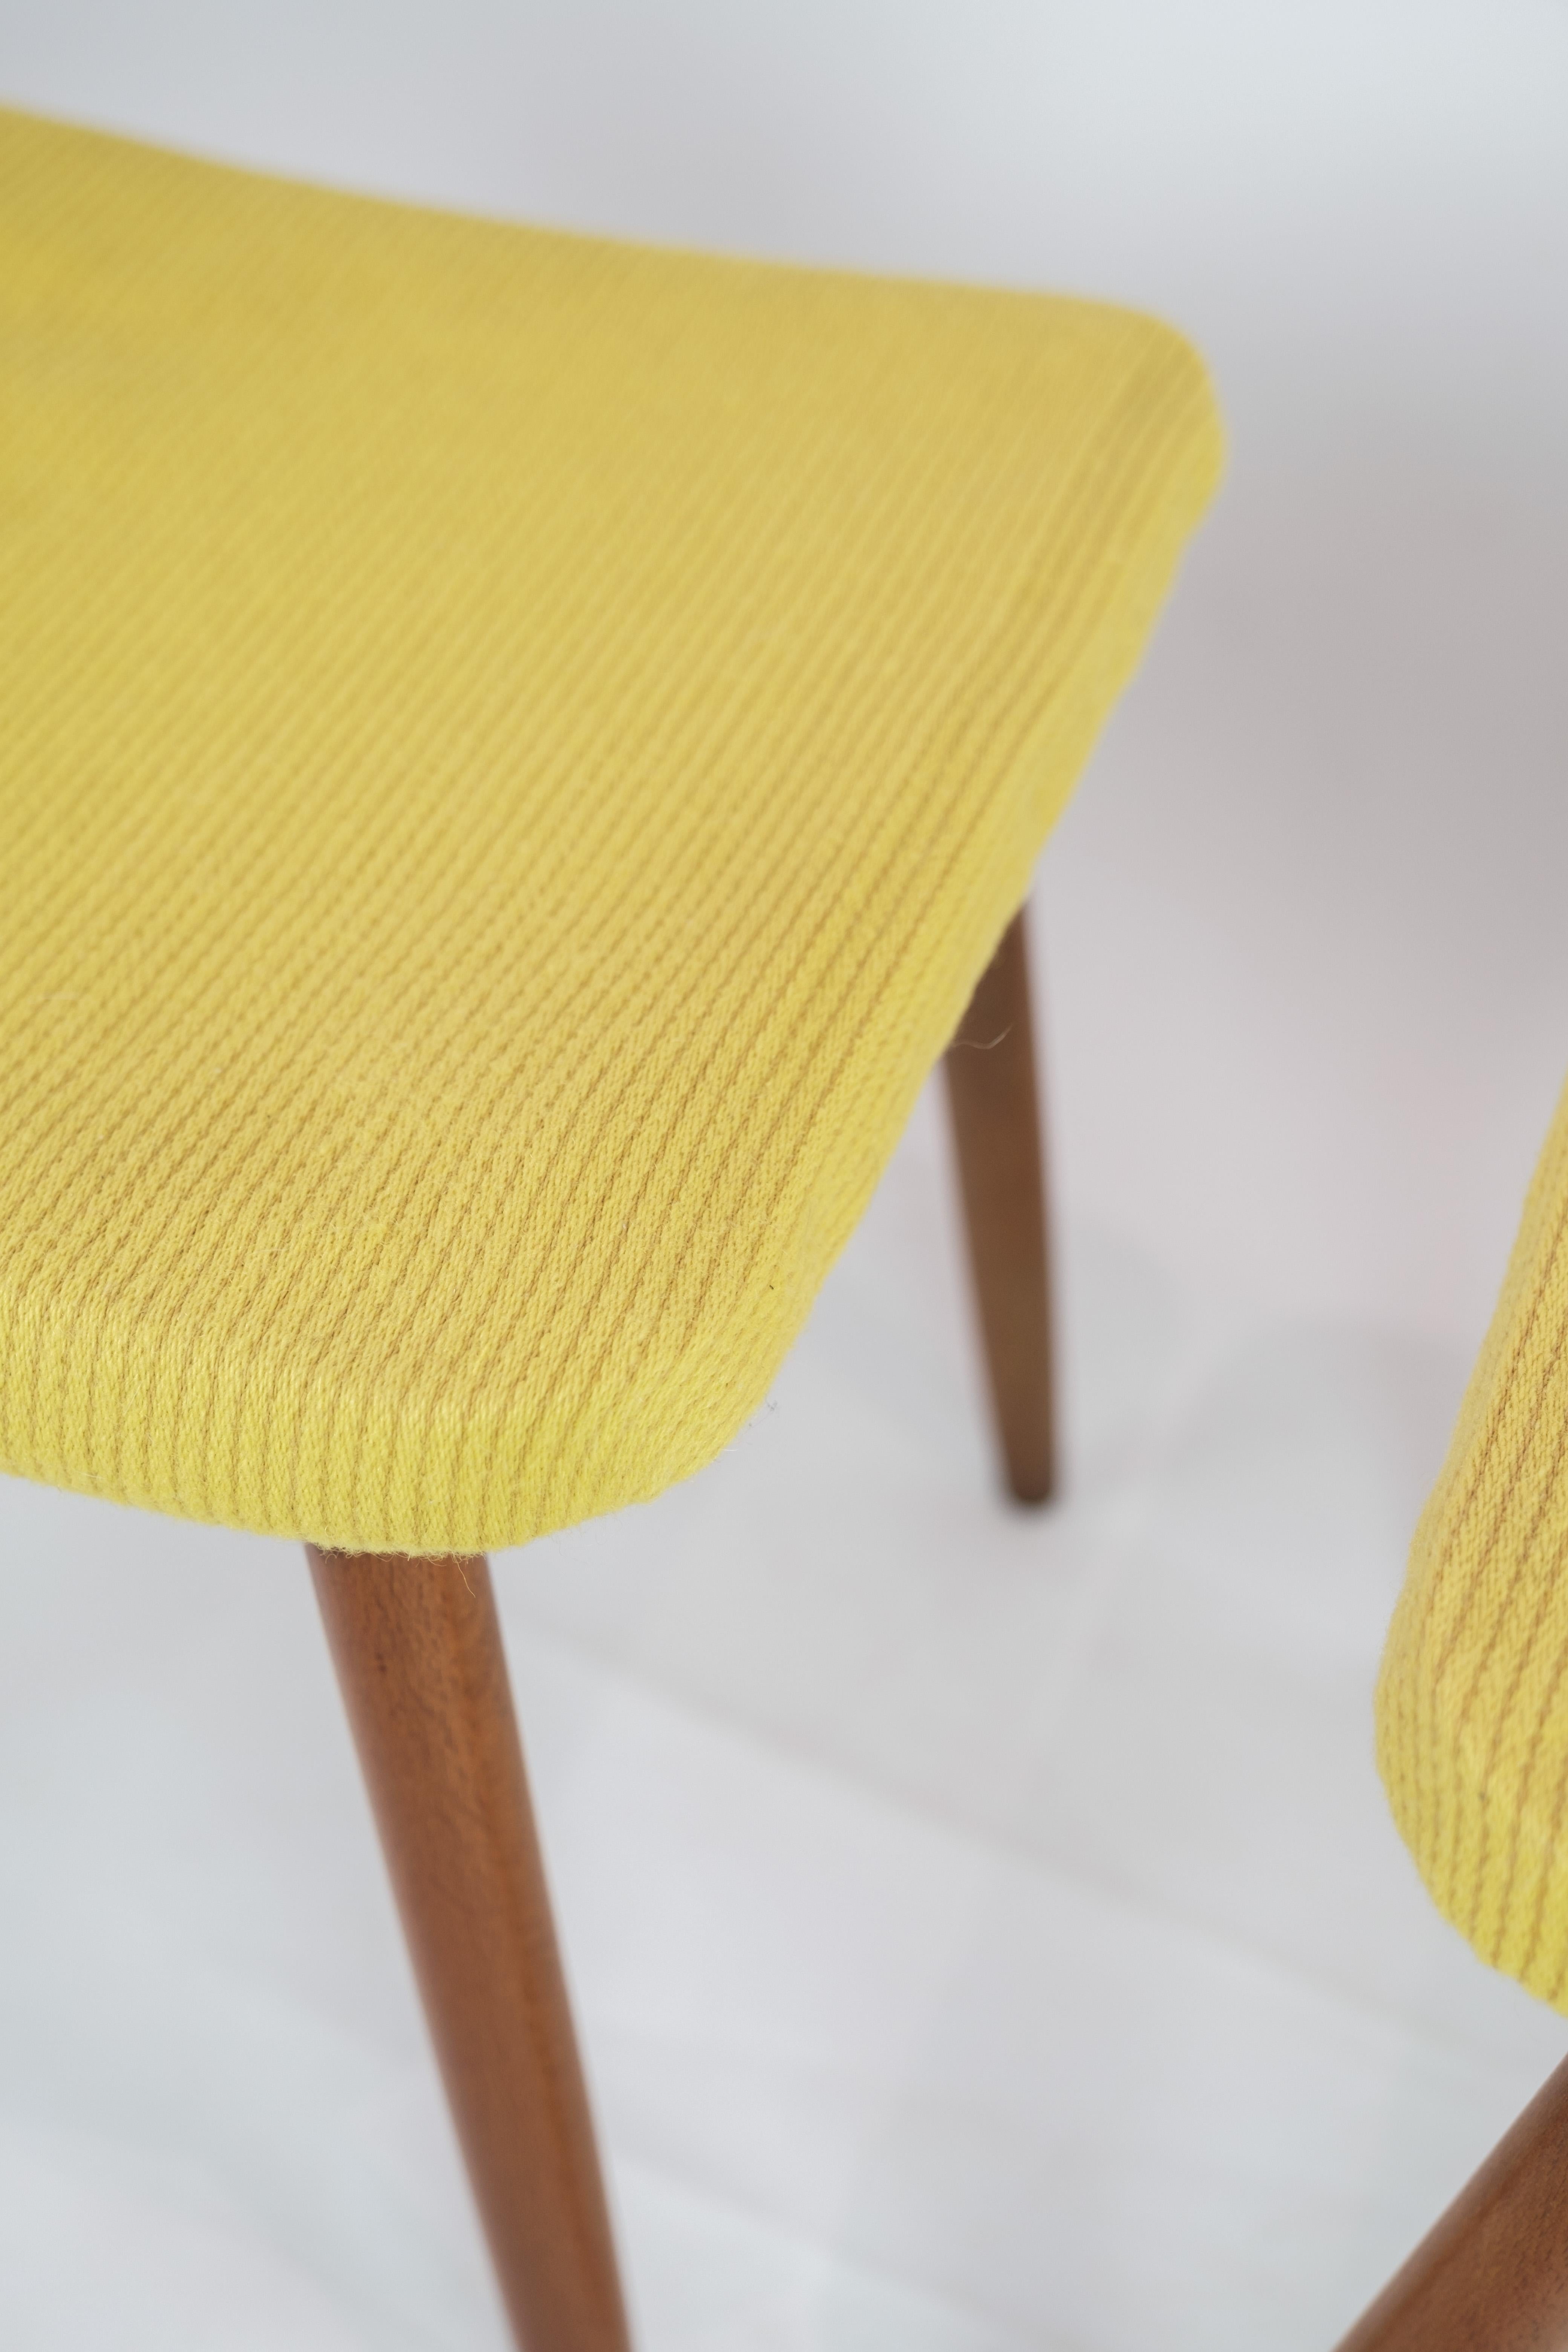 Mid-Century Modern Vintage Stools With Yellow Fabric & Teak Legs From 1960s For Sale